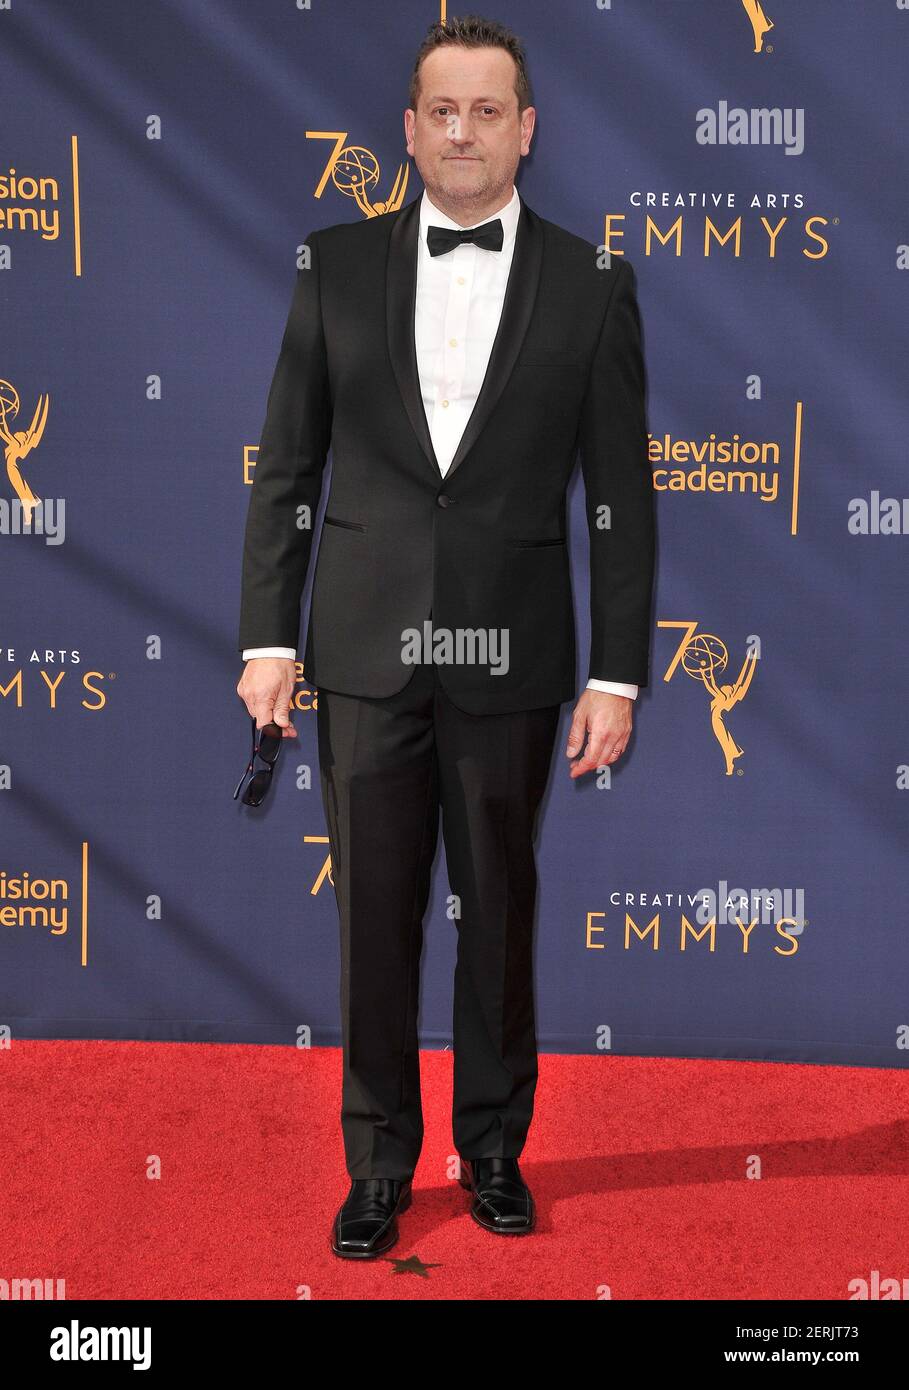 Mike Penketh arrives at the 2018 Creative Arts Emmy Awards - Day 1 held at the Microsoft Theater in Los Angeles, CA on Saturday, September 8, 2018. (Photo By Sthanlee B. Mirador/Sipa USA) Stock Photo